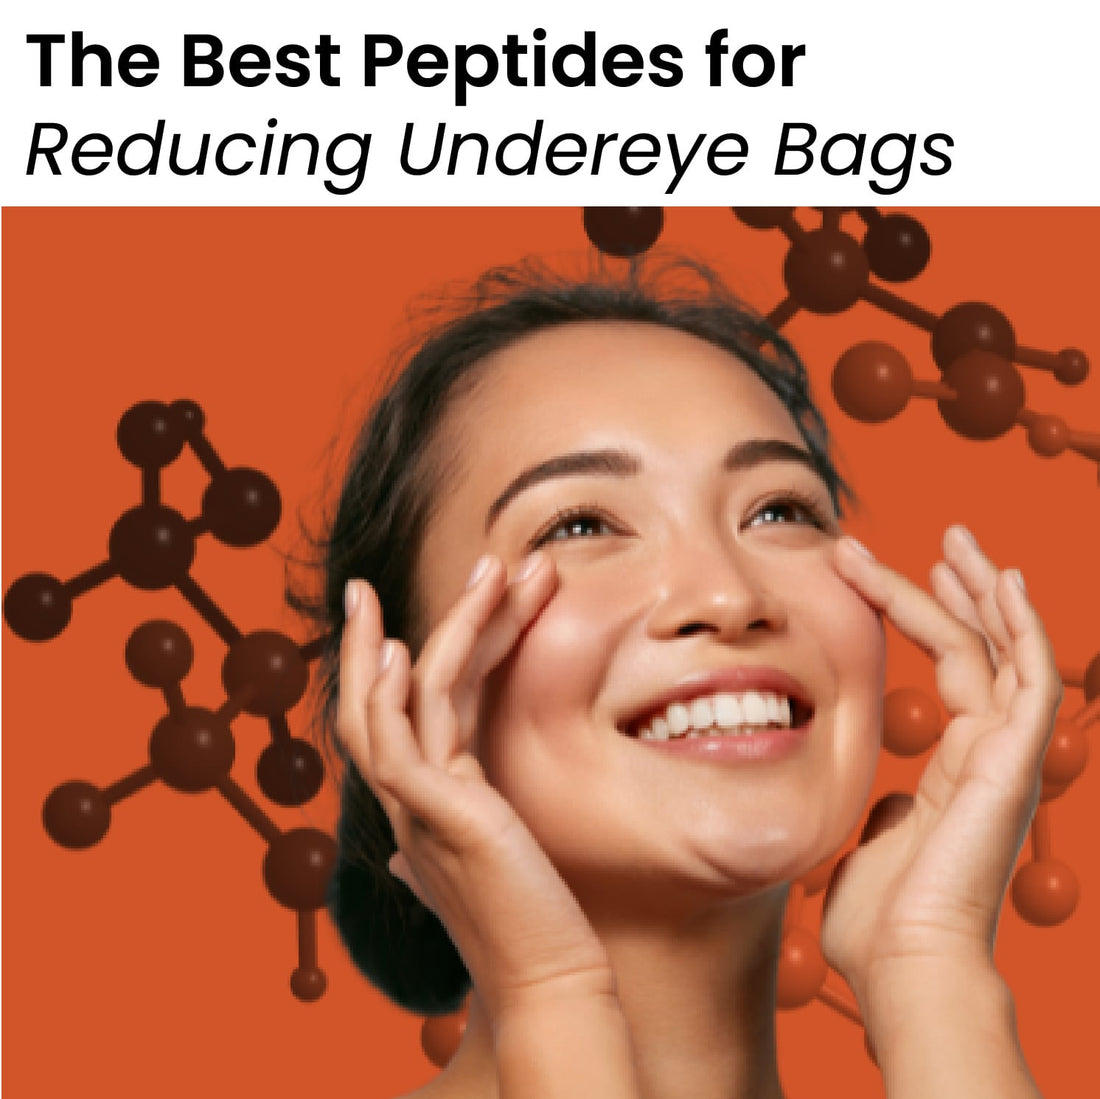 The Best Ingredients for Dark Circles and Bags